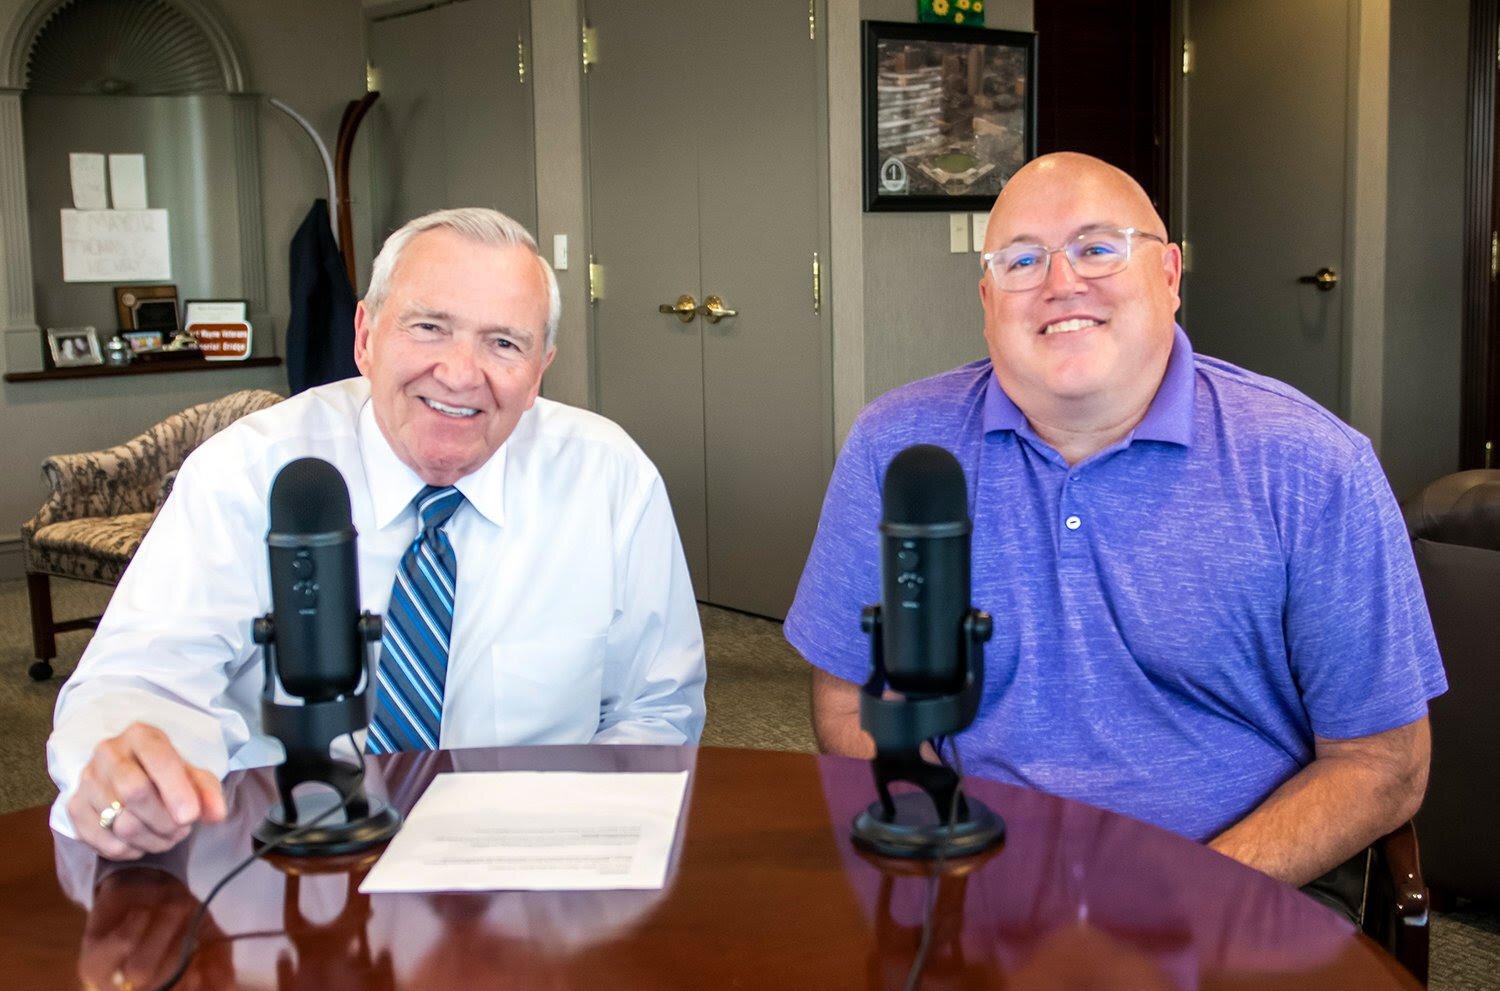 Brightpoint President/CEO Steve Hoffman, right, was on the podcast of Mayor Tom Henry, left, earlier this year to discuss the agency’s impactful work.